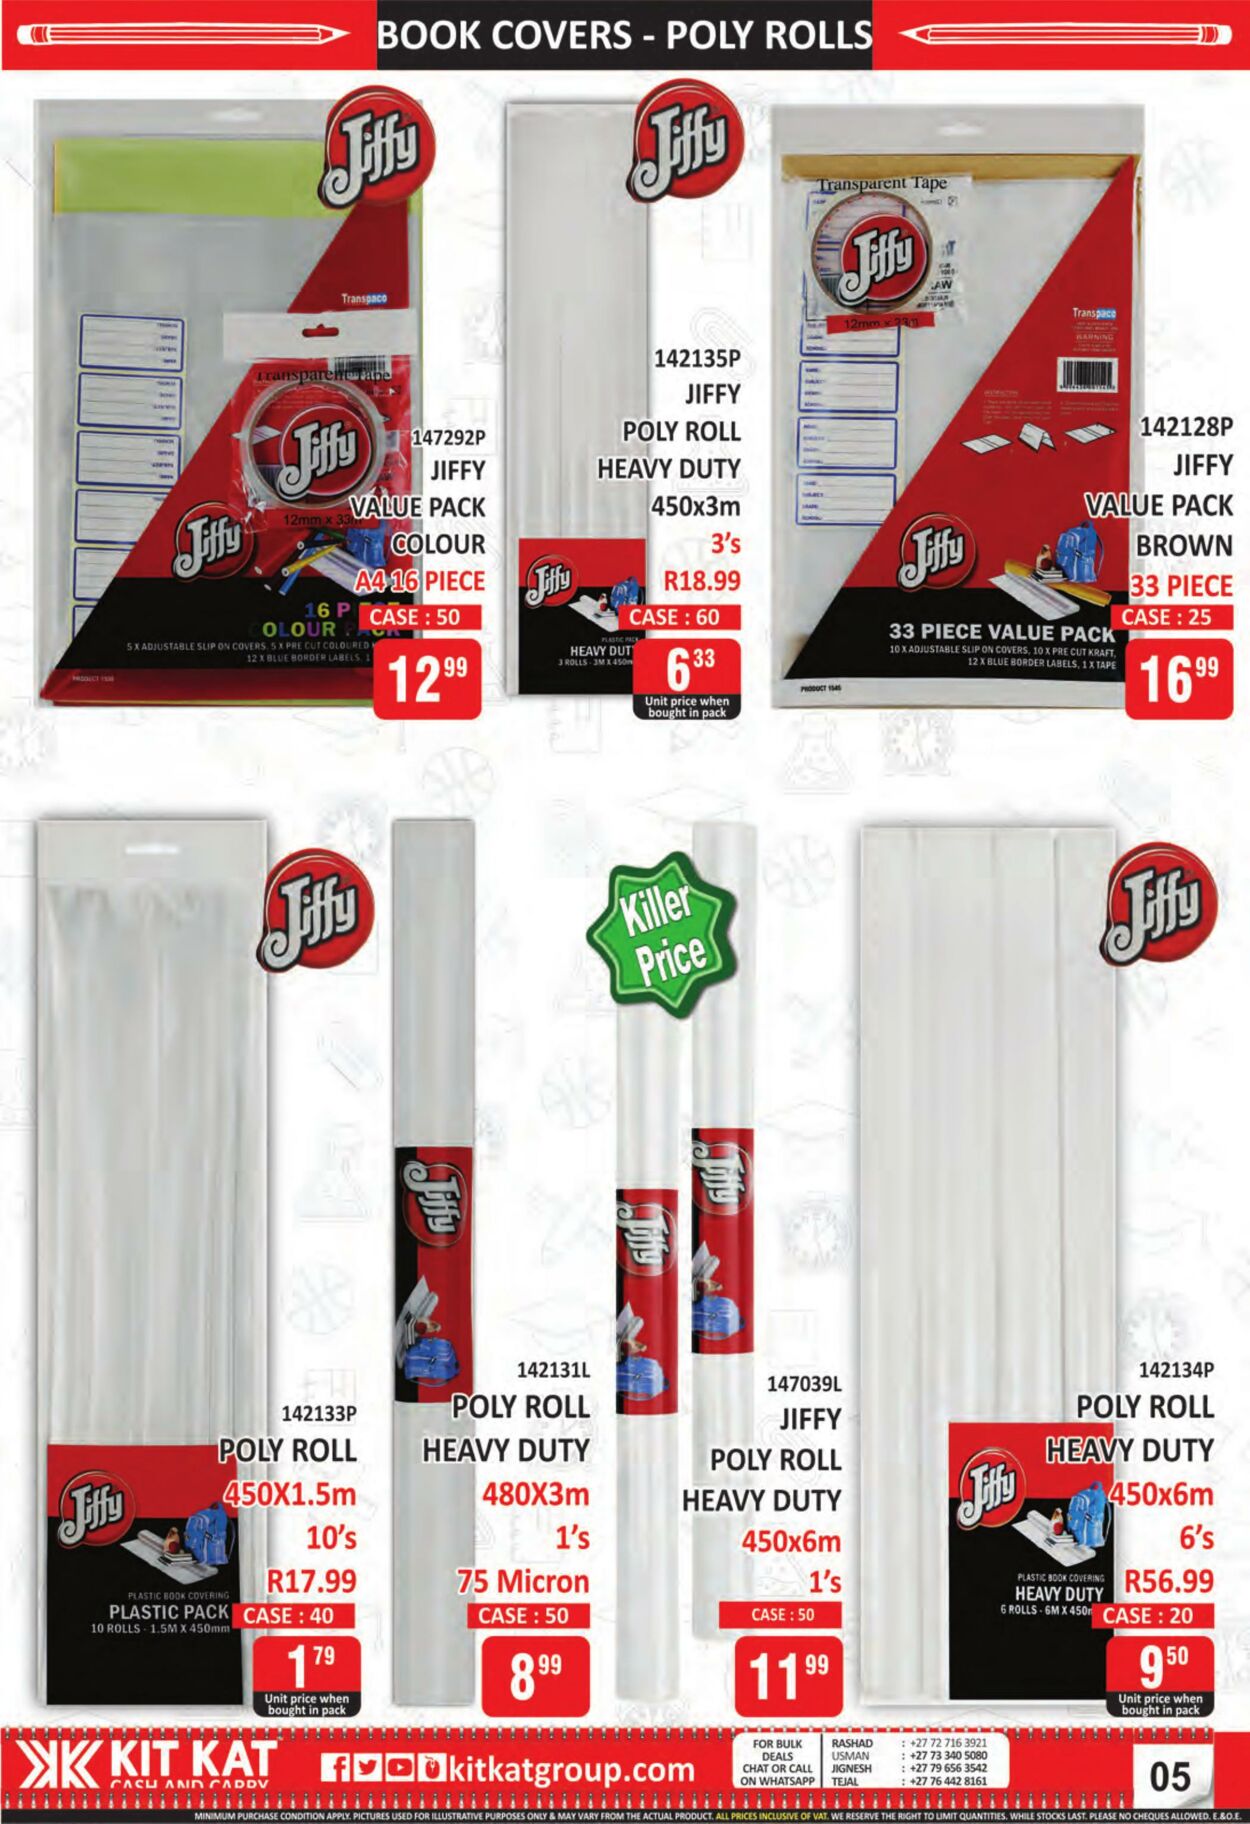 Special Kit Kat Cash and Carry 23.11.2022 - 25.01.2023